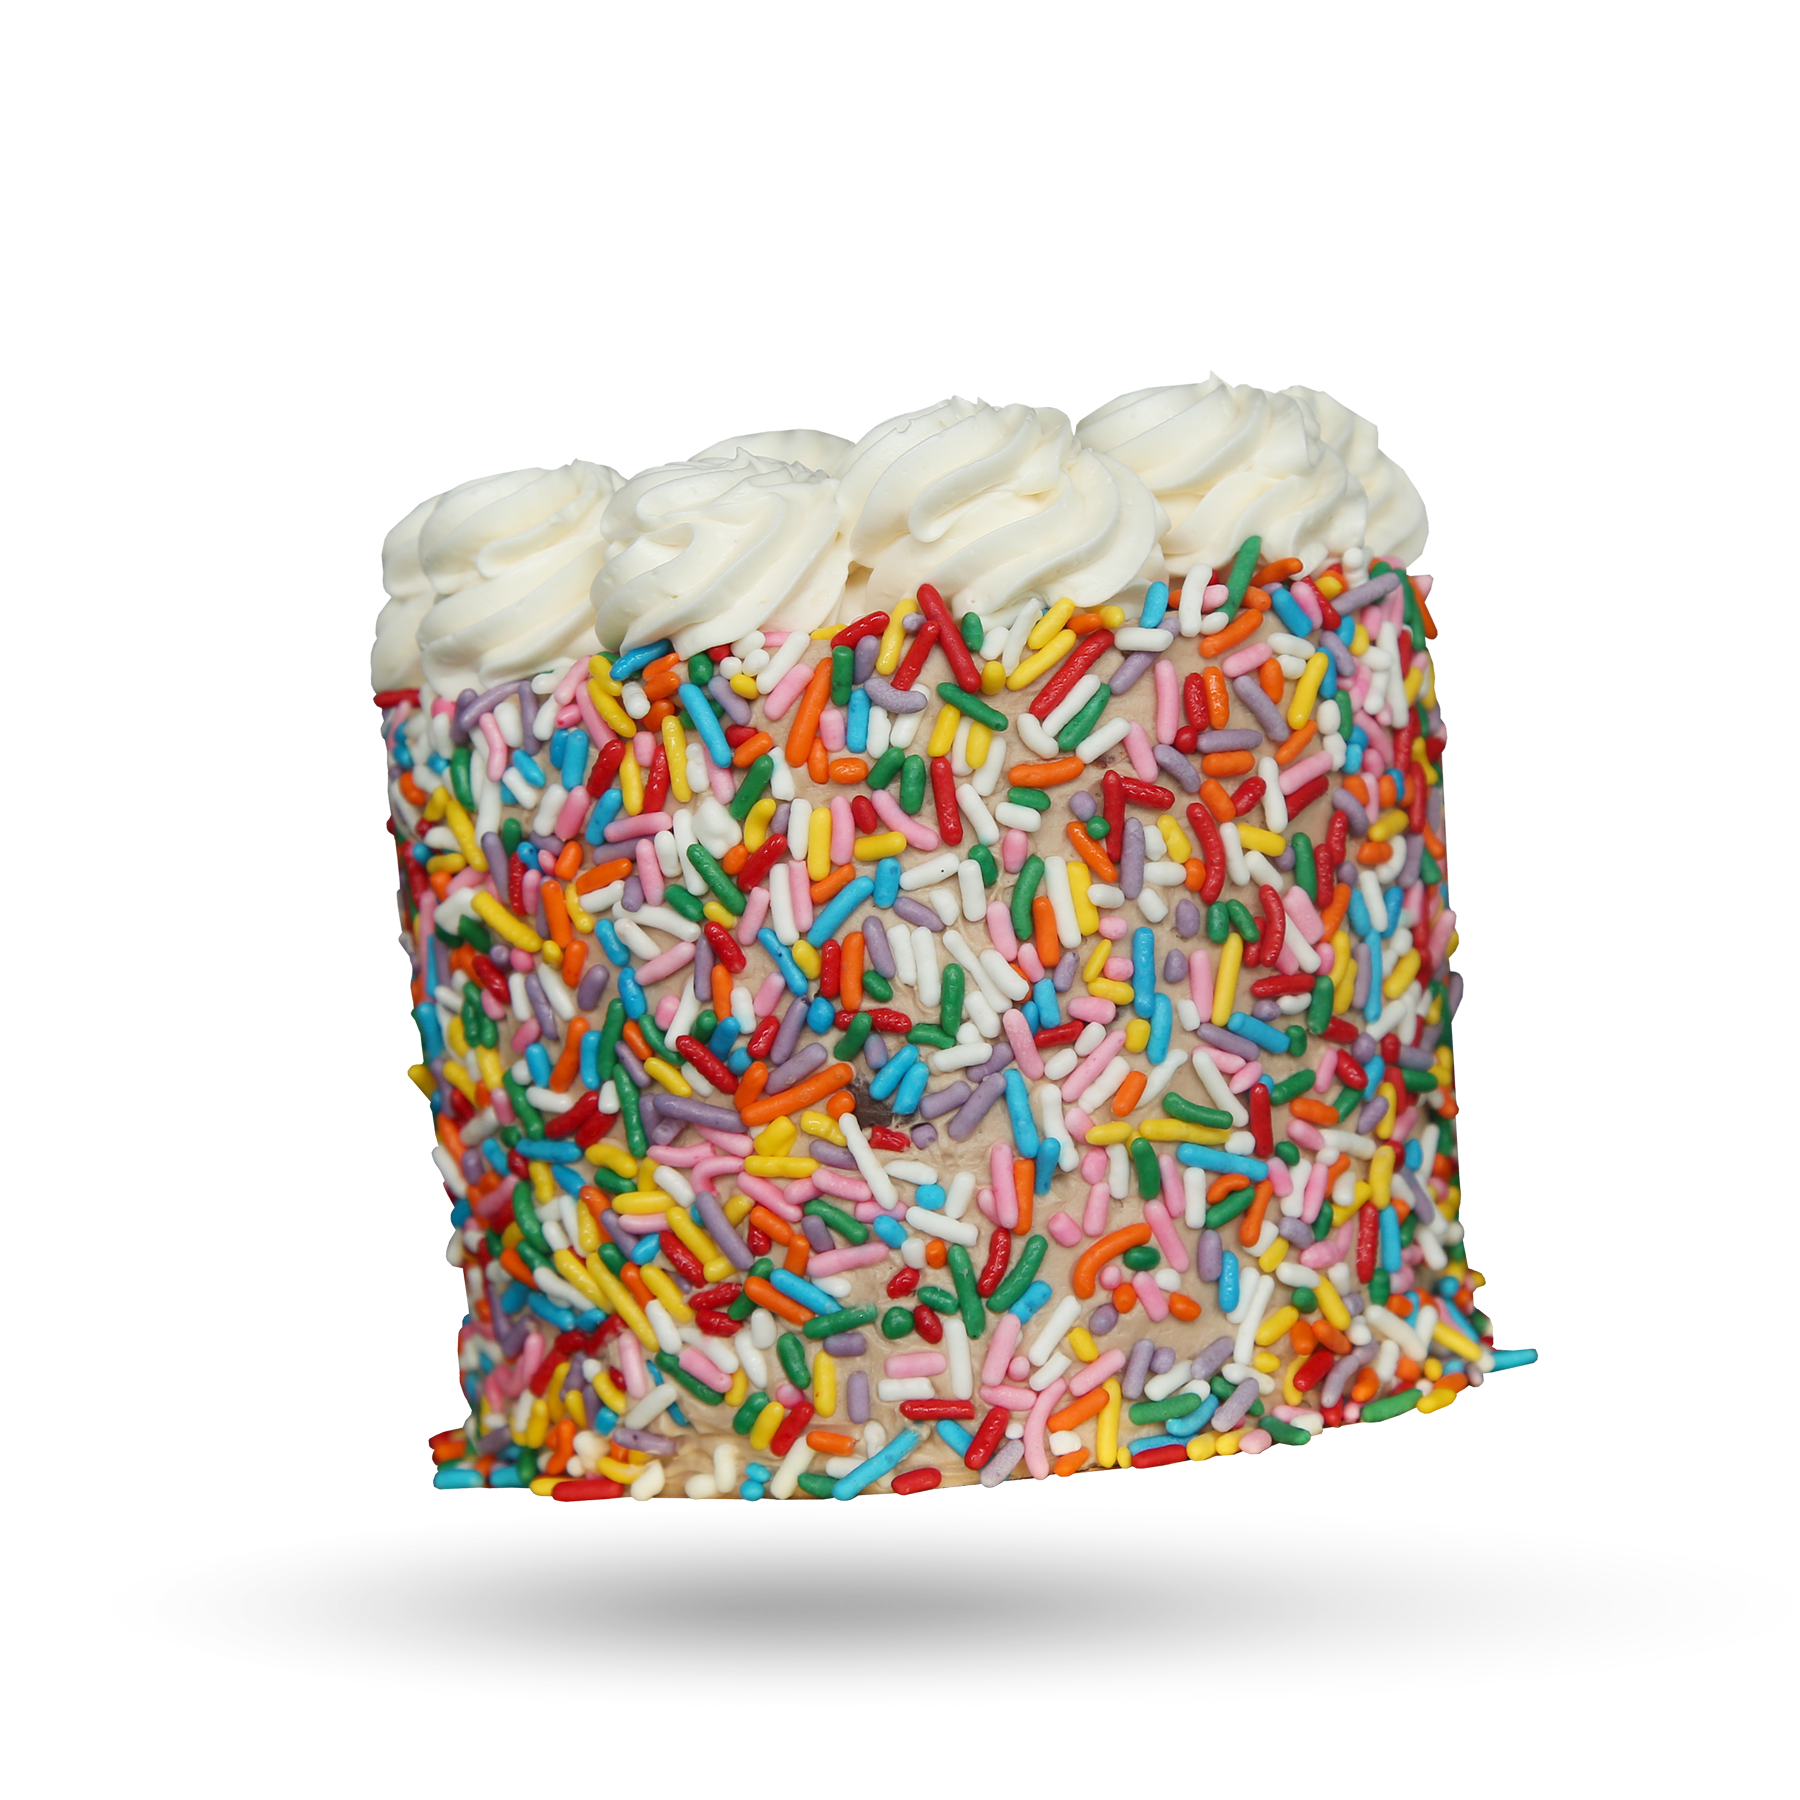 All About The Sprinkles!